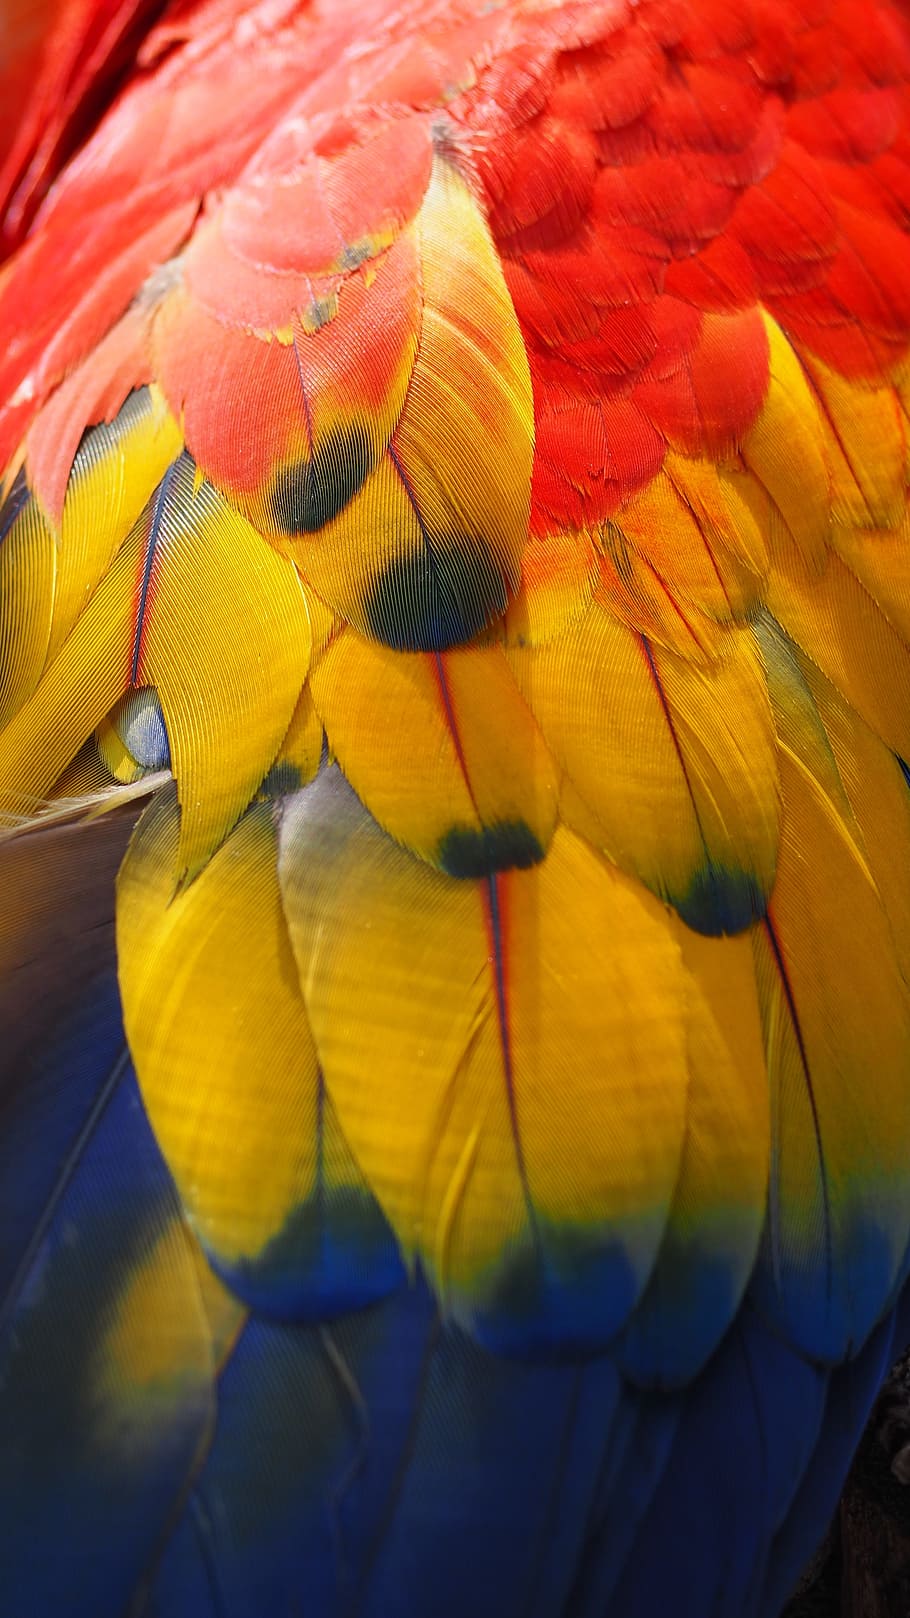 Parrot, Bird, Animal, Tropical, Feather, red, wild, zoo, colorful, color